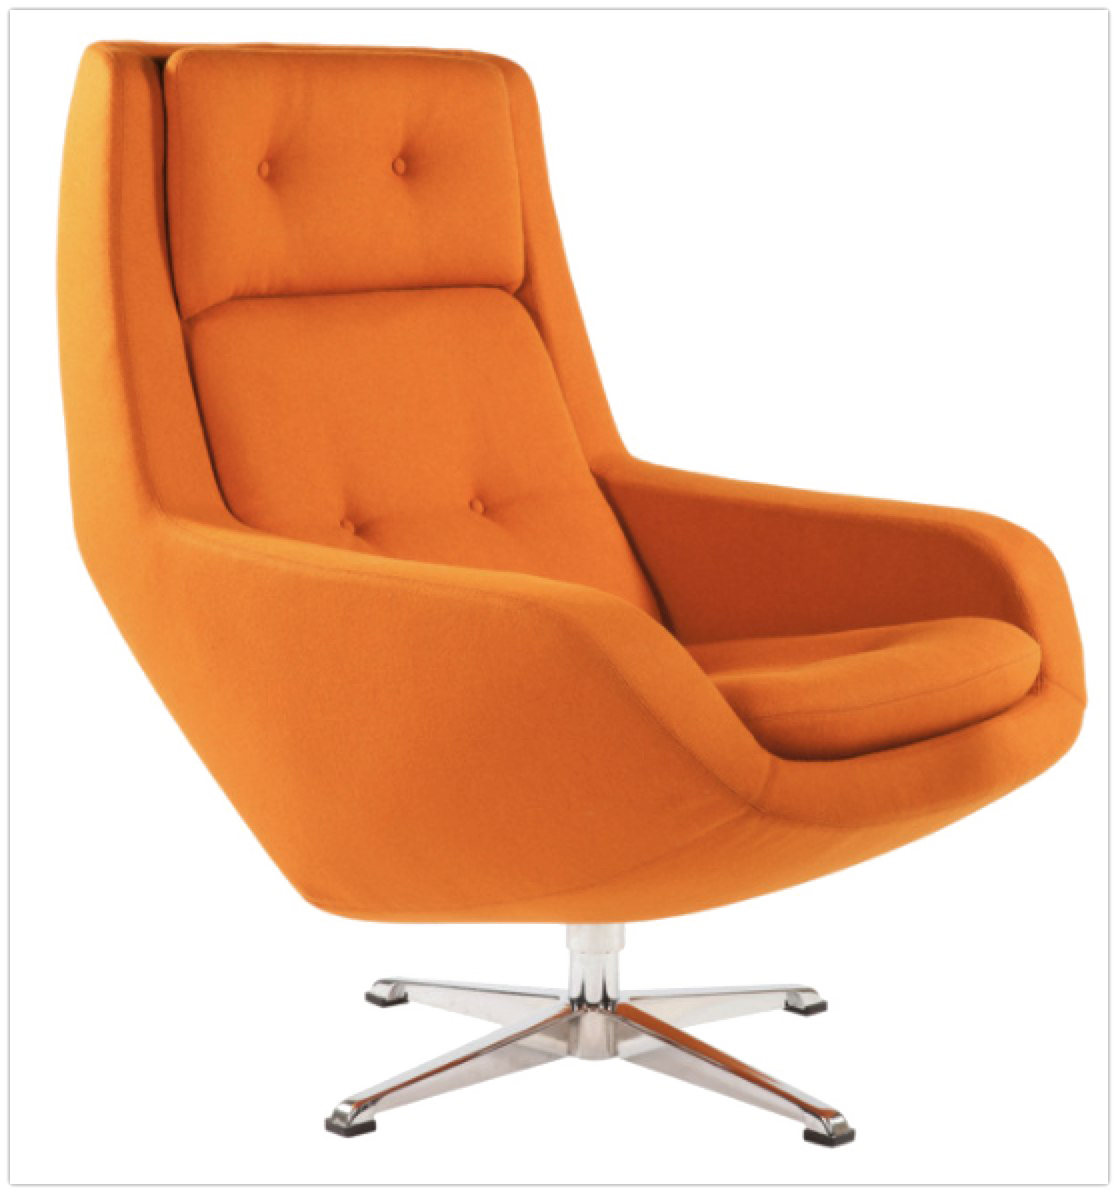 Lounge Chair Download Free HQ Image PNG Image